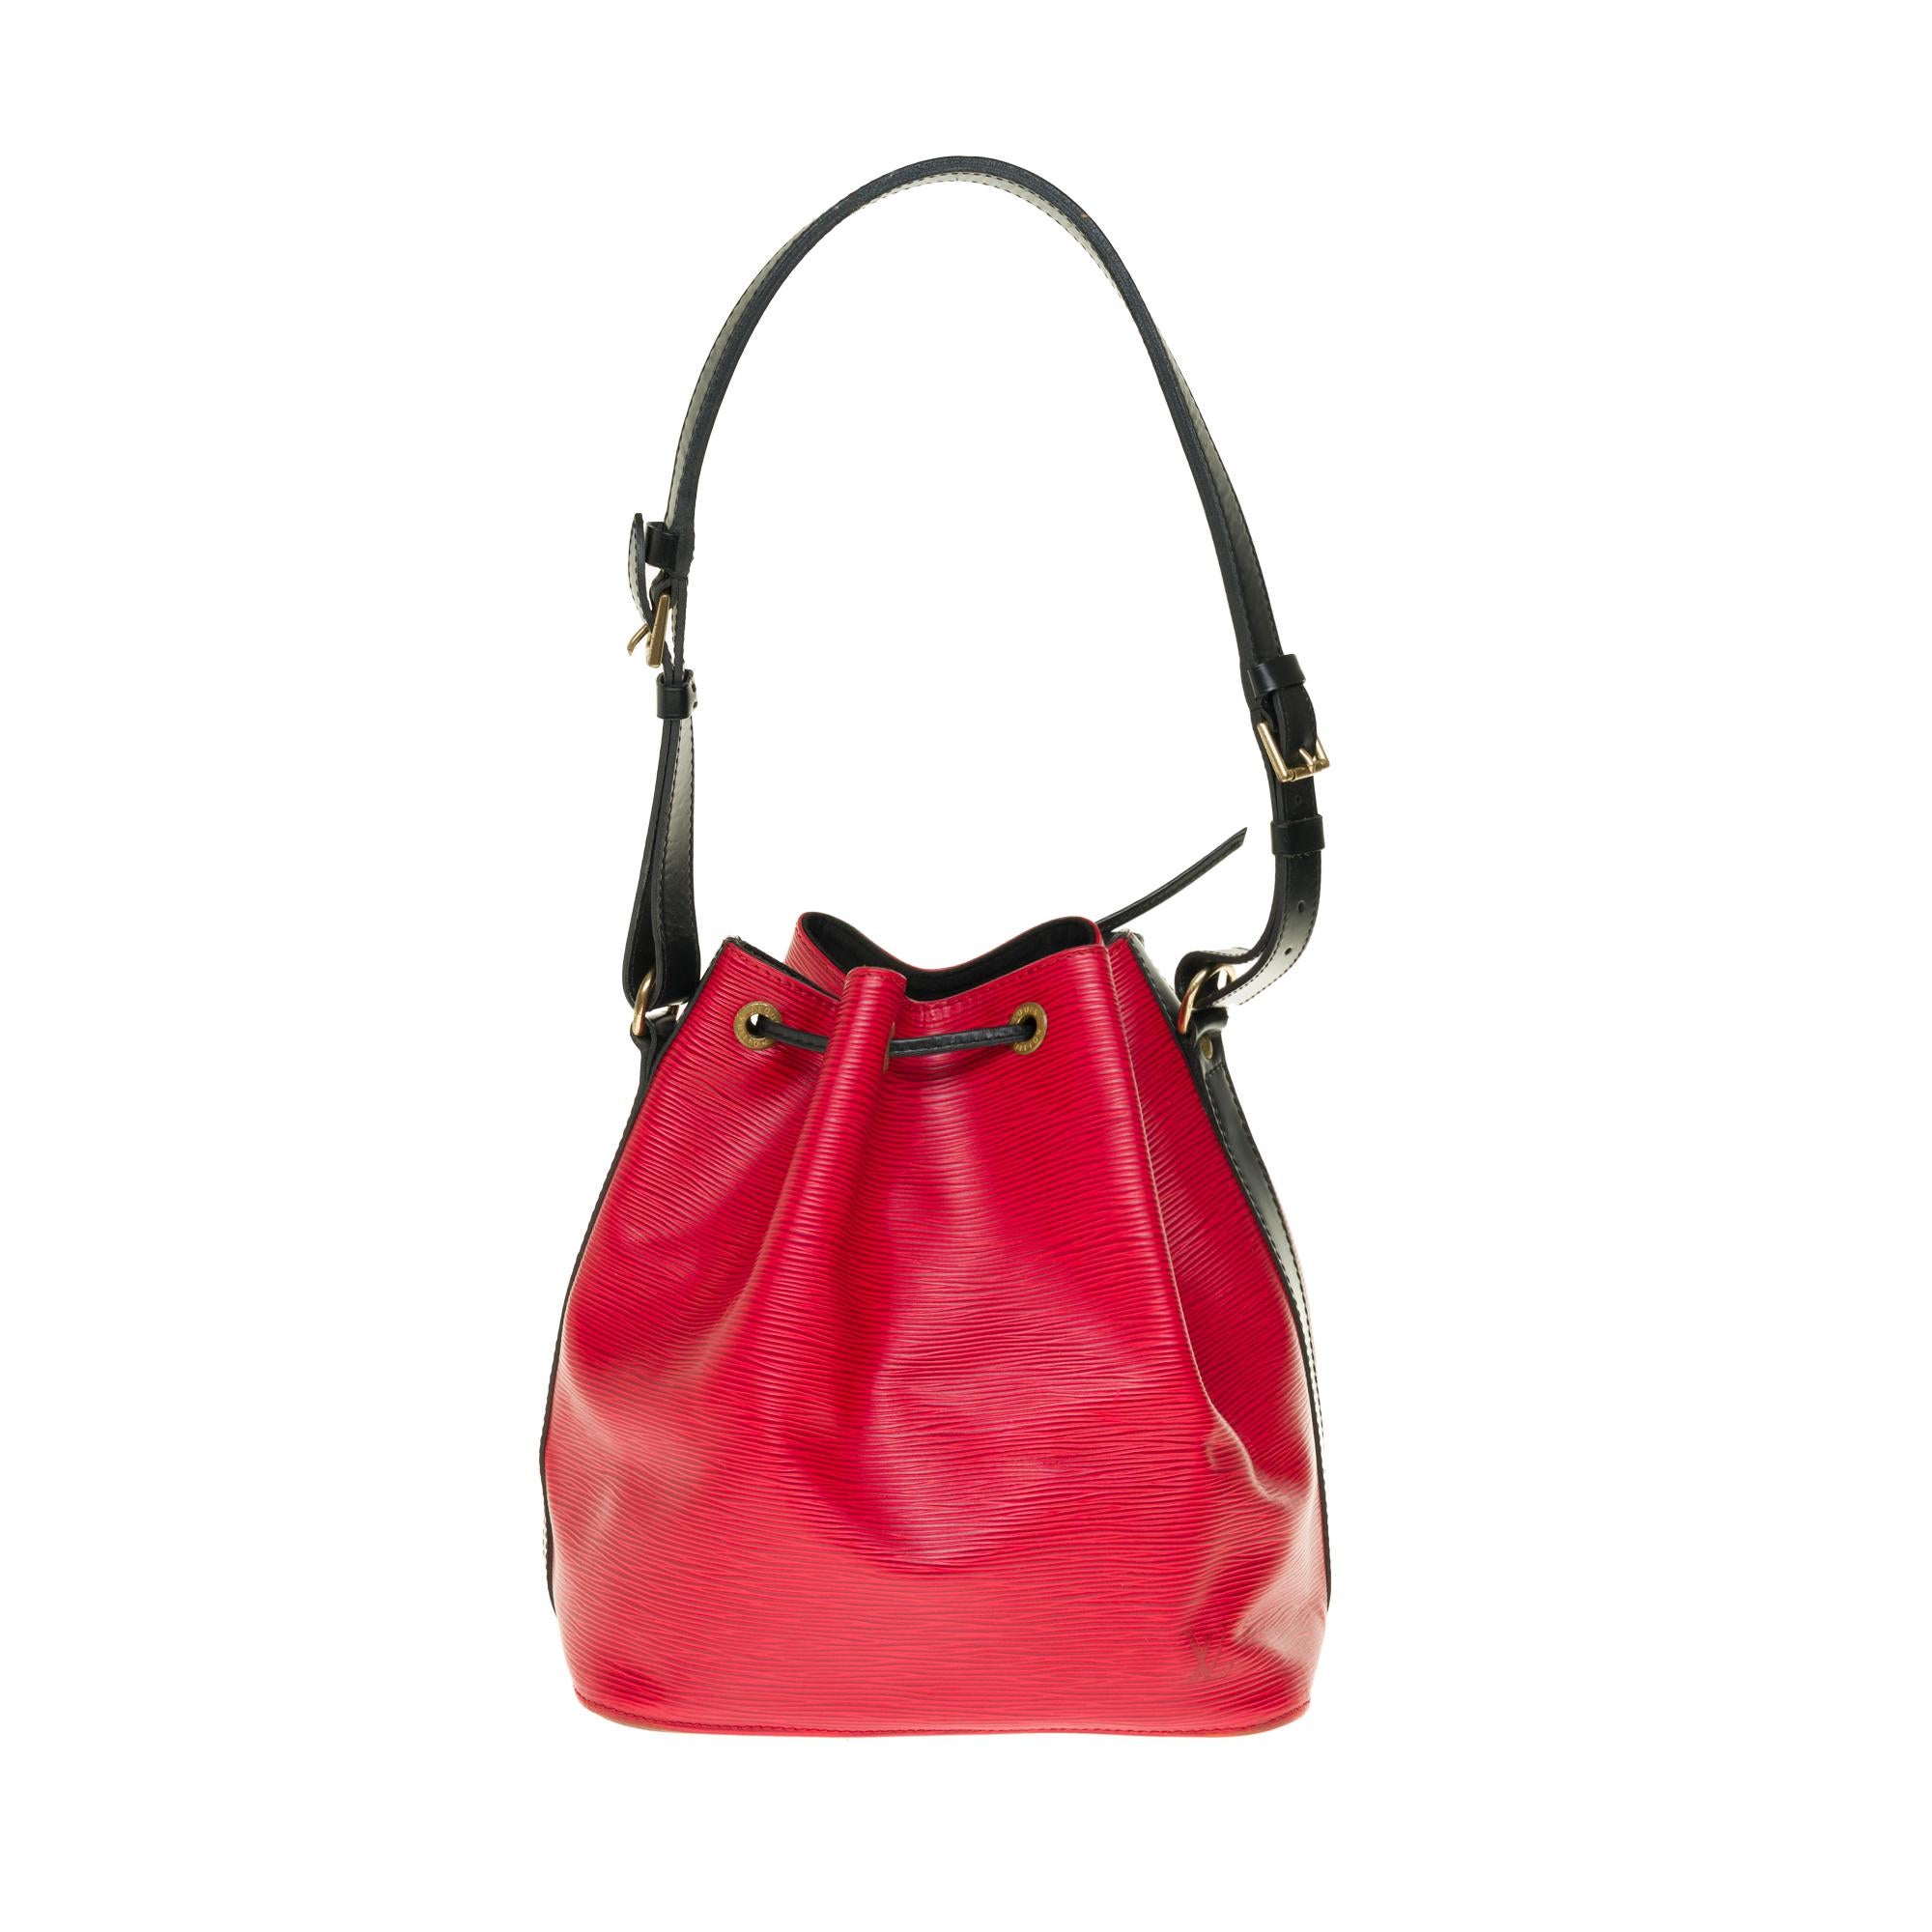 Louis Vuitton Noé PM shoulder bag in red and black epi leather, gold ...